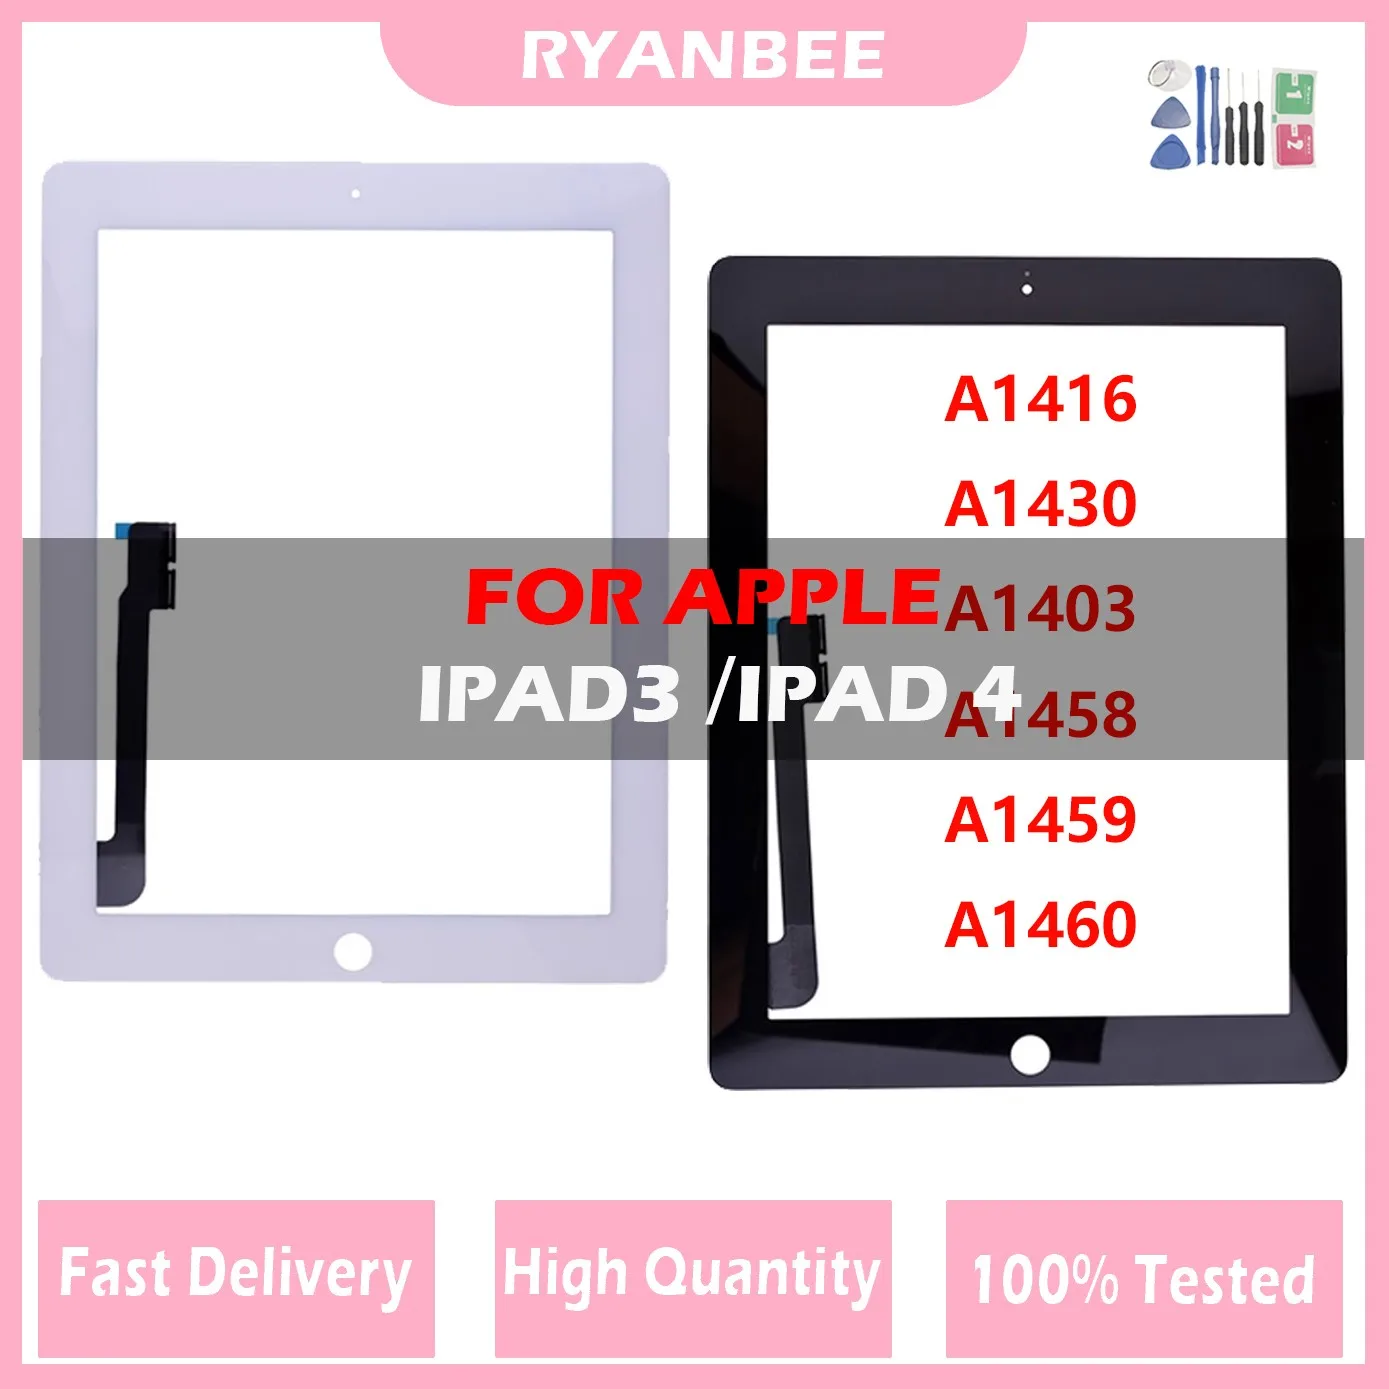 

Touch Screen New For iPad3 iPad4 iPad 3 4 A1416 A1430 A1403 A1458 A1459 A1460 LCD Outer Digitizer Sensor Glass Panel Replacement